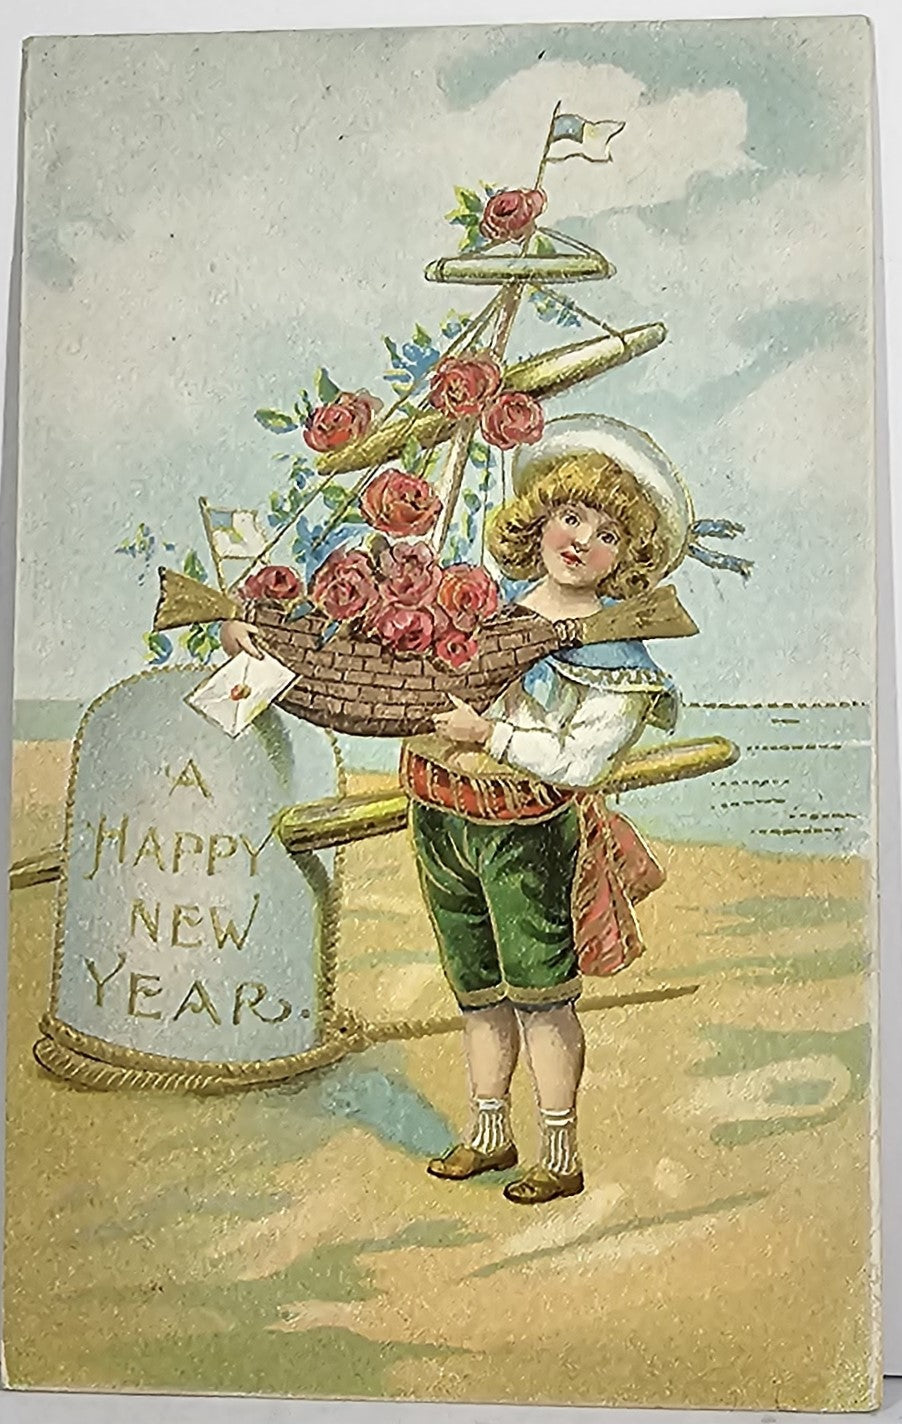 New Year Postcard German Embossed Sailor Boy Holding Ship with Roses